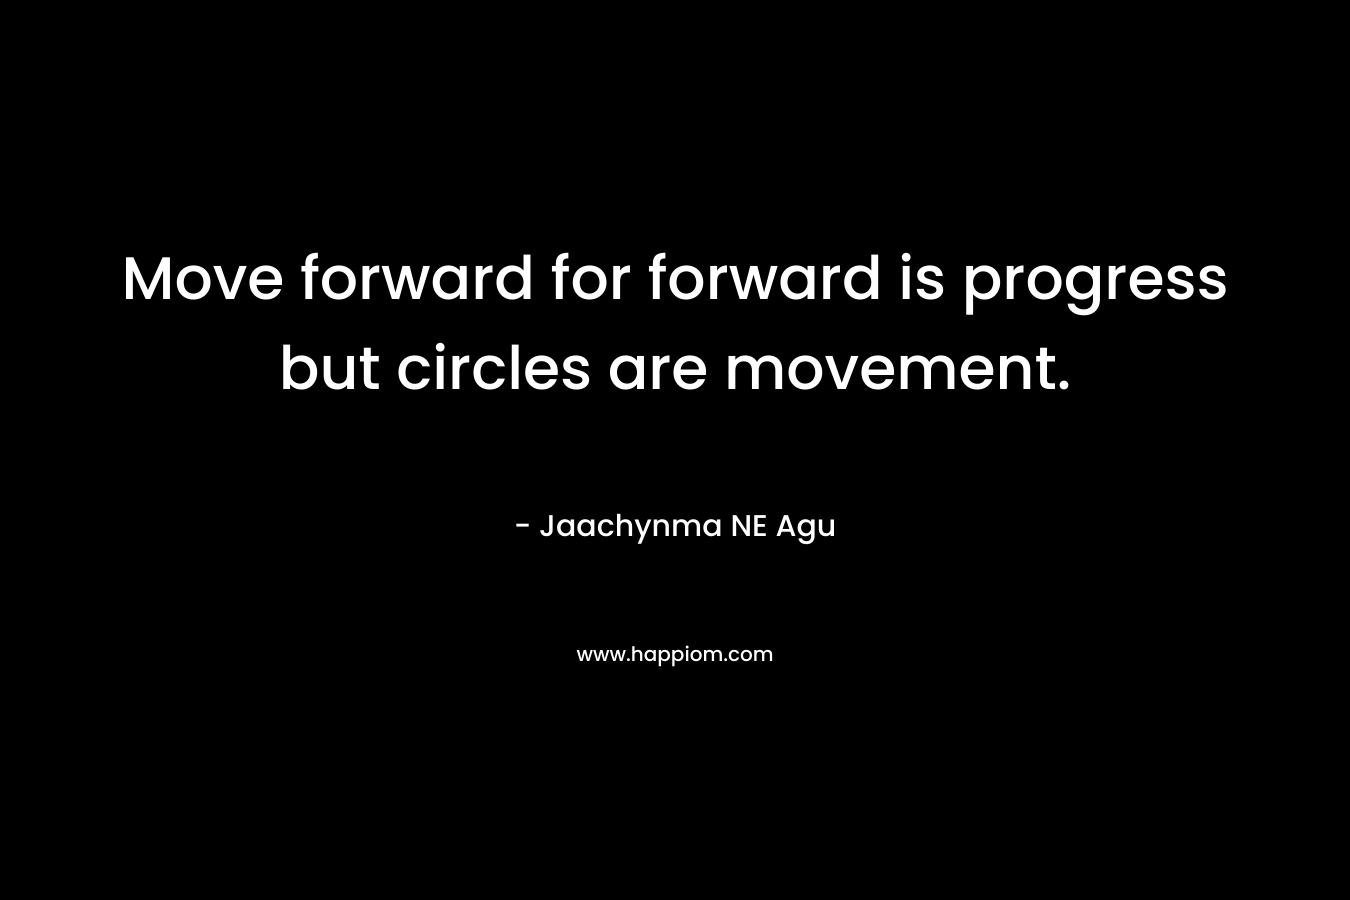 Move forward for forward is progress but circles are movement.